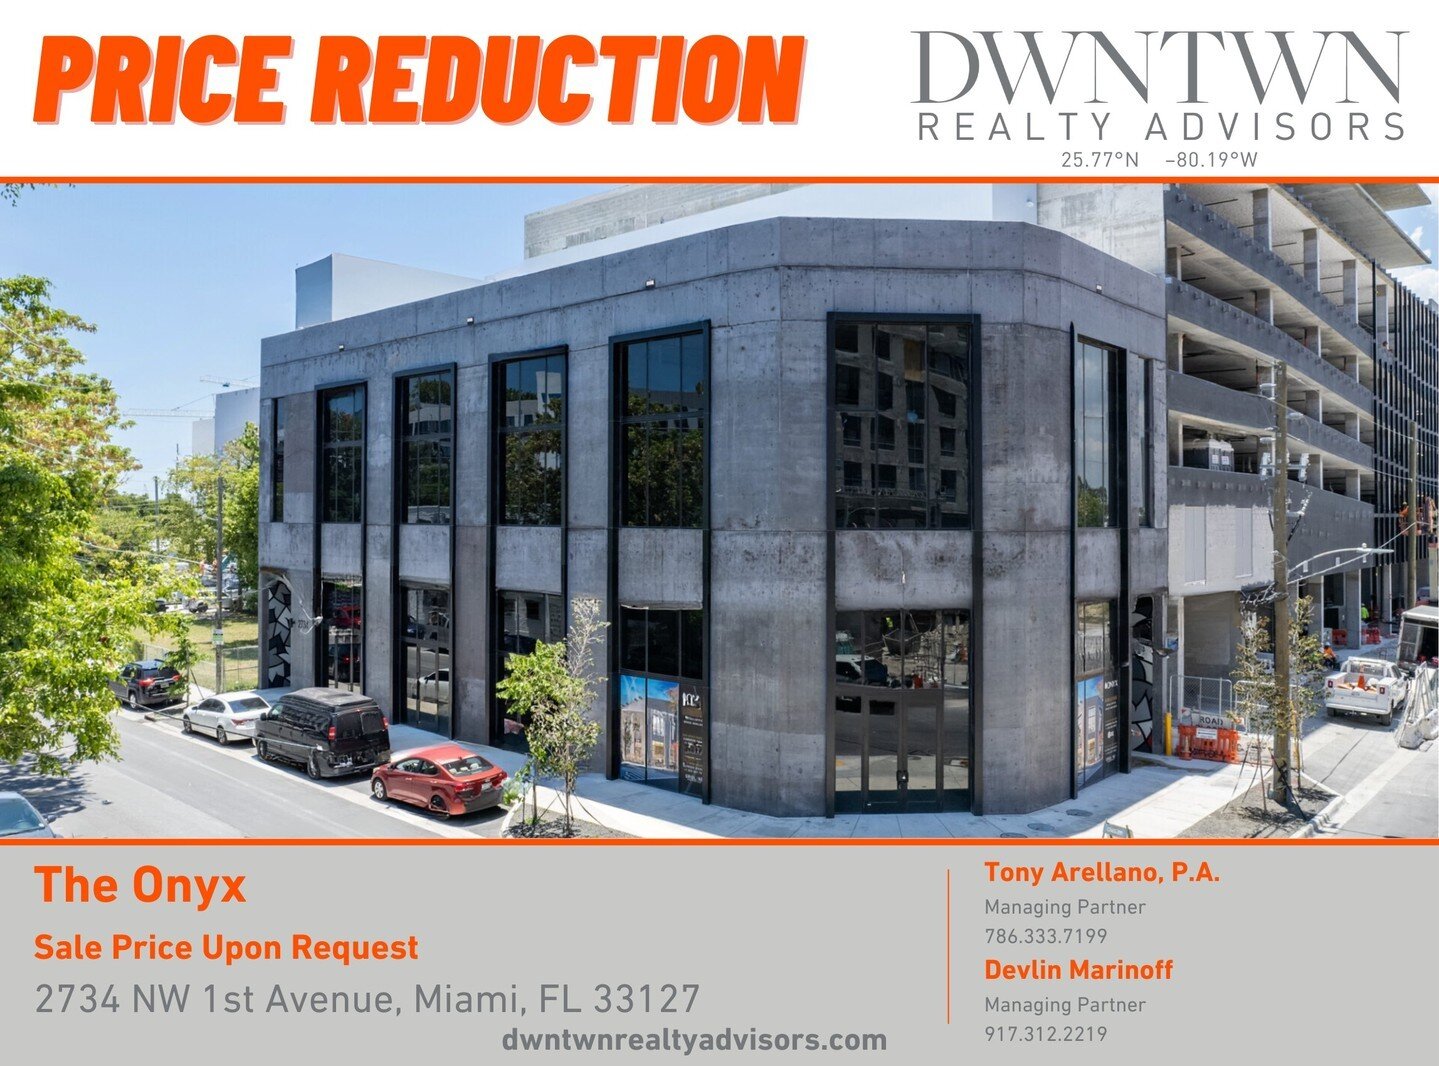 PRICE REDUCTION | The Onyx For Sale

DWNTWN Realty Advisors has been retained exclusively to arrange the sale of The Onyx at 2734 NW 1st Avenue, Miami, FL 33127. The Onyx is a recently constructed free-standing corner building with 4 levels and a roo